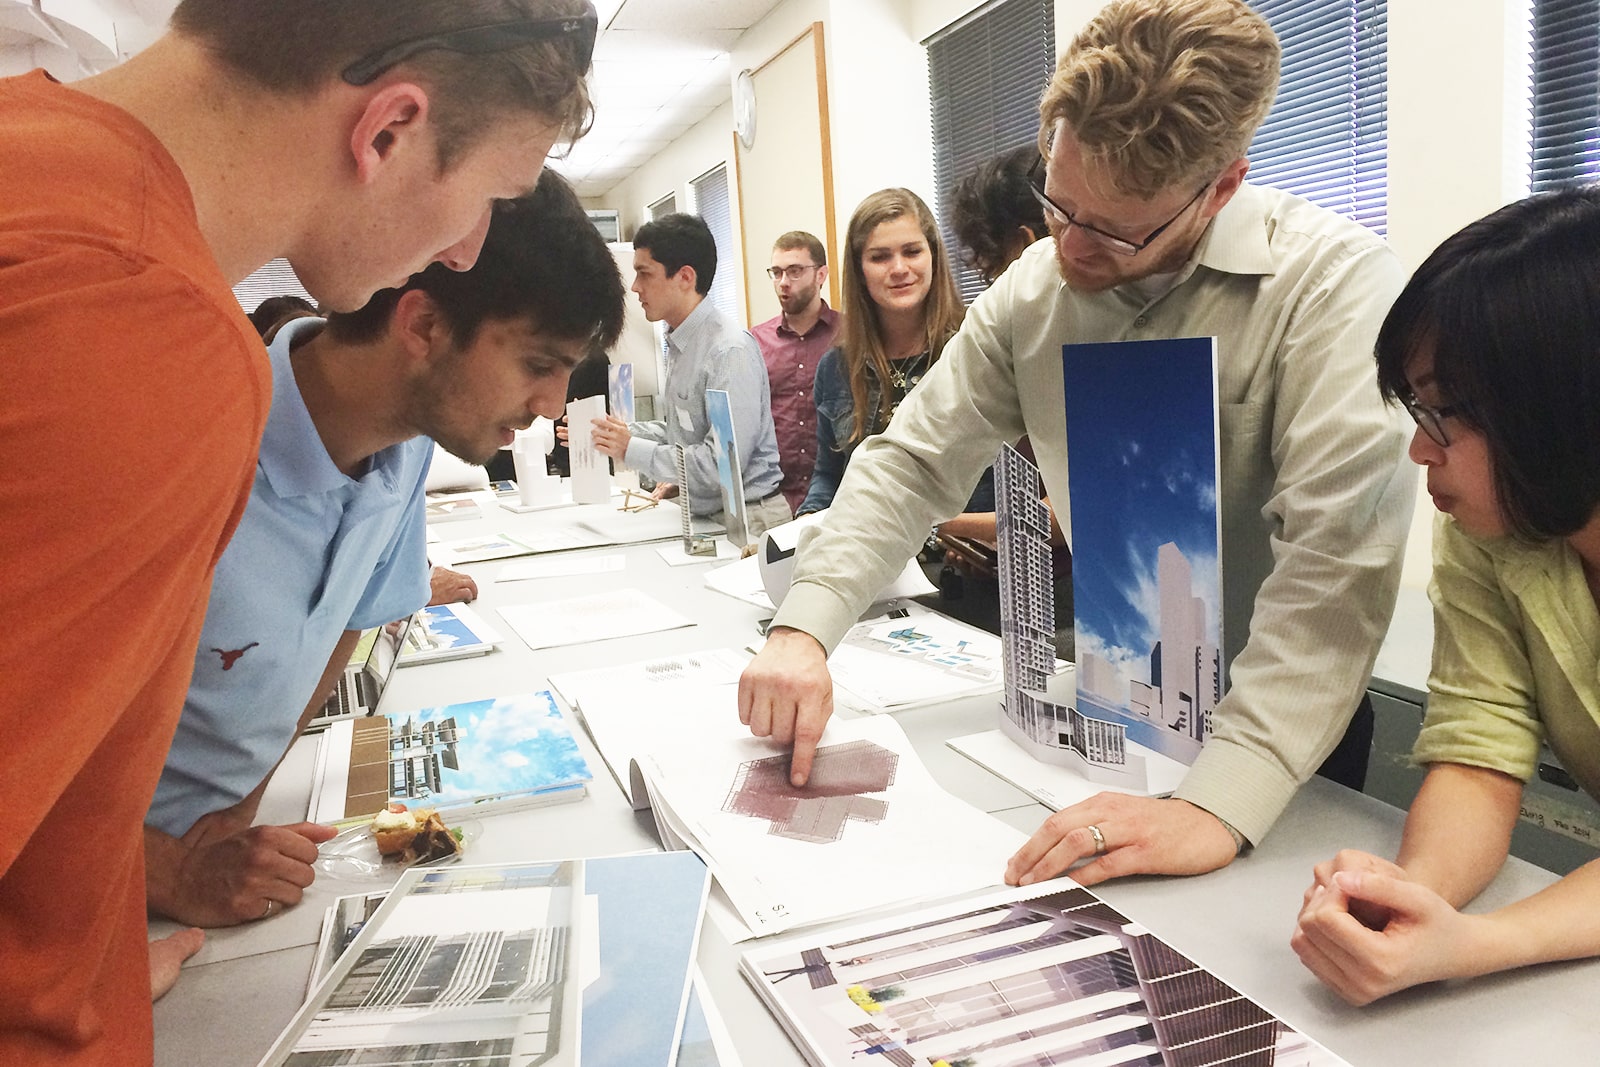 Texas architectural engineering students gathered around a table while professor gestures to book